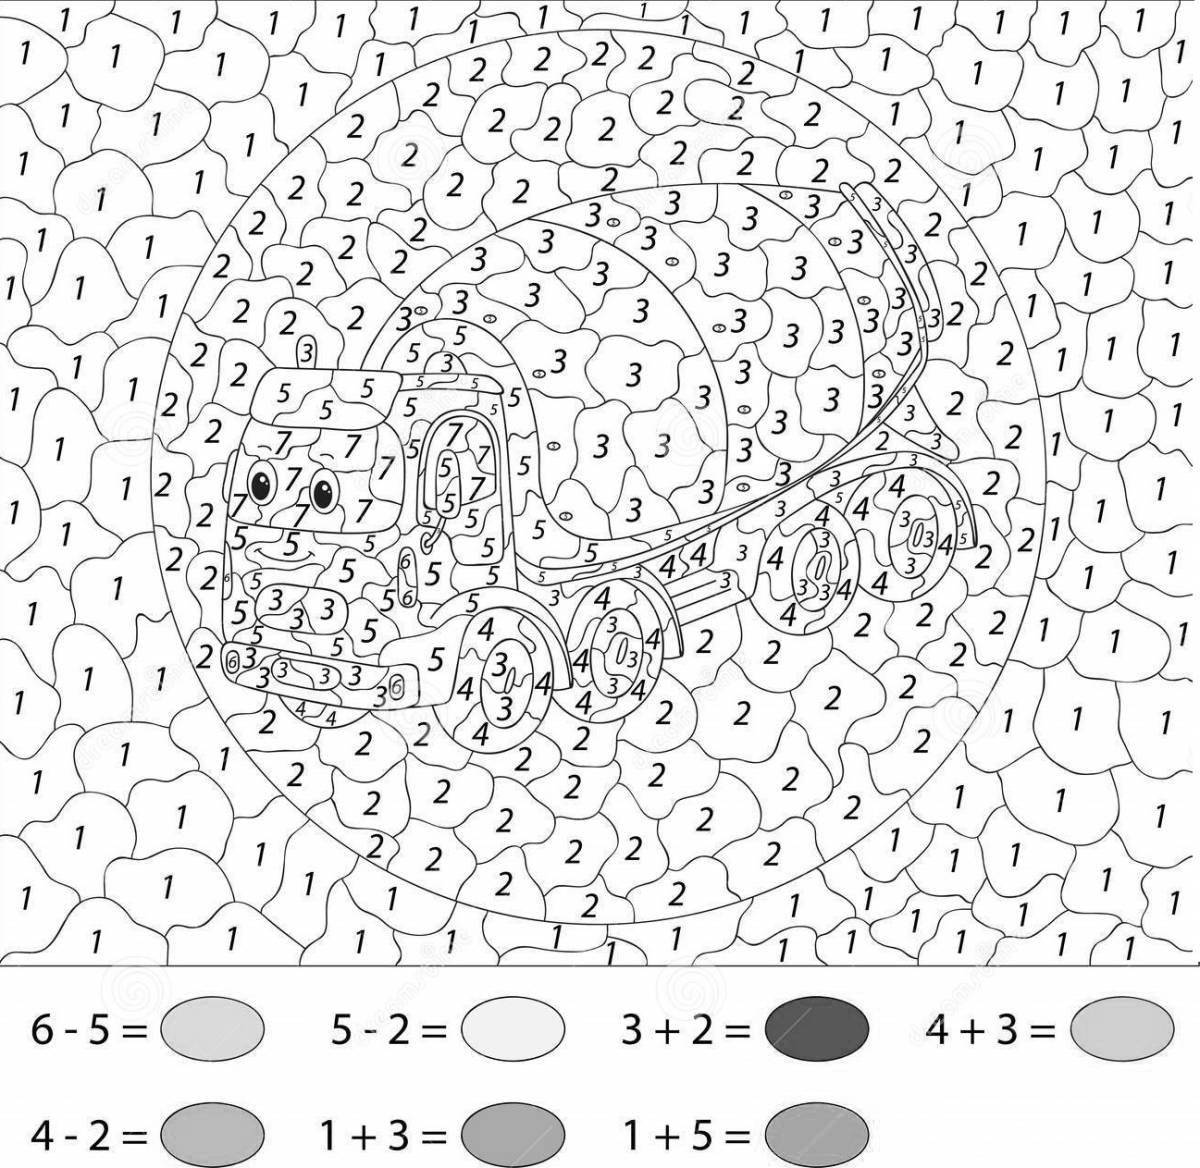 Lovely strawberry number coloring game